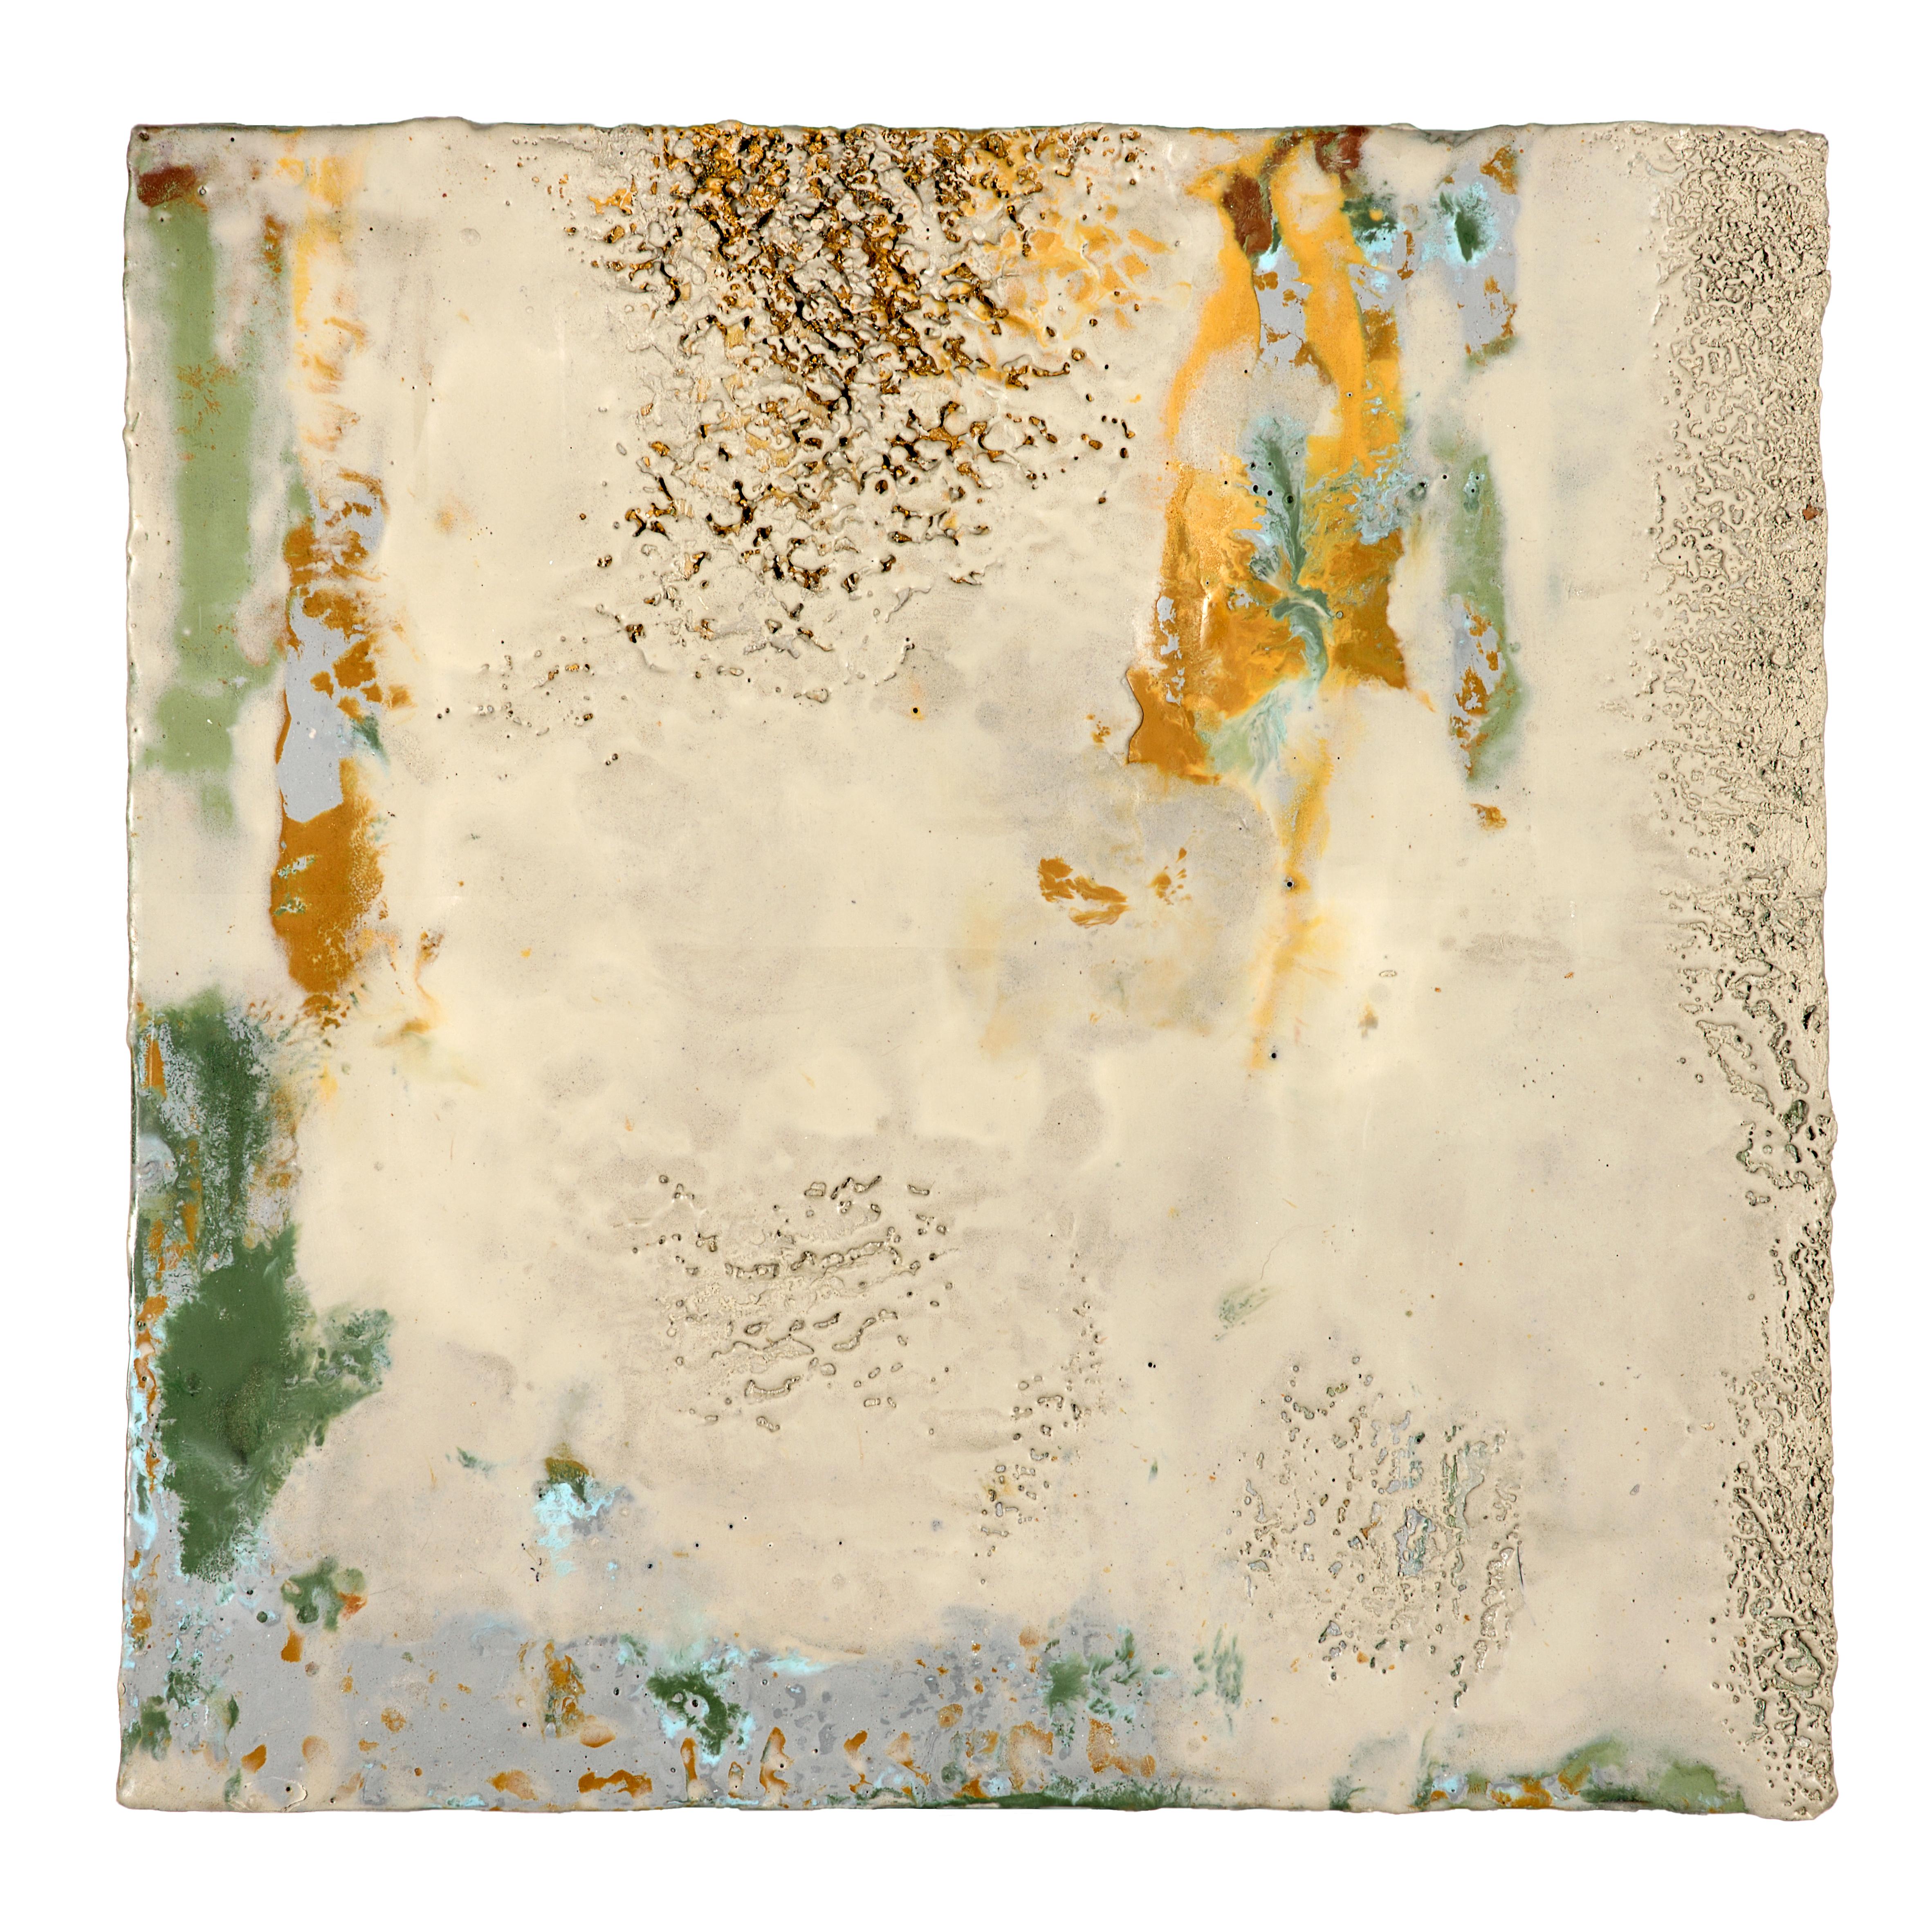 Contemporary Richard Hirsch Encaustic Painting of Nothing #62, 2020 For Sale